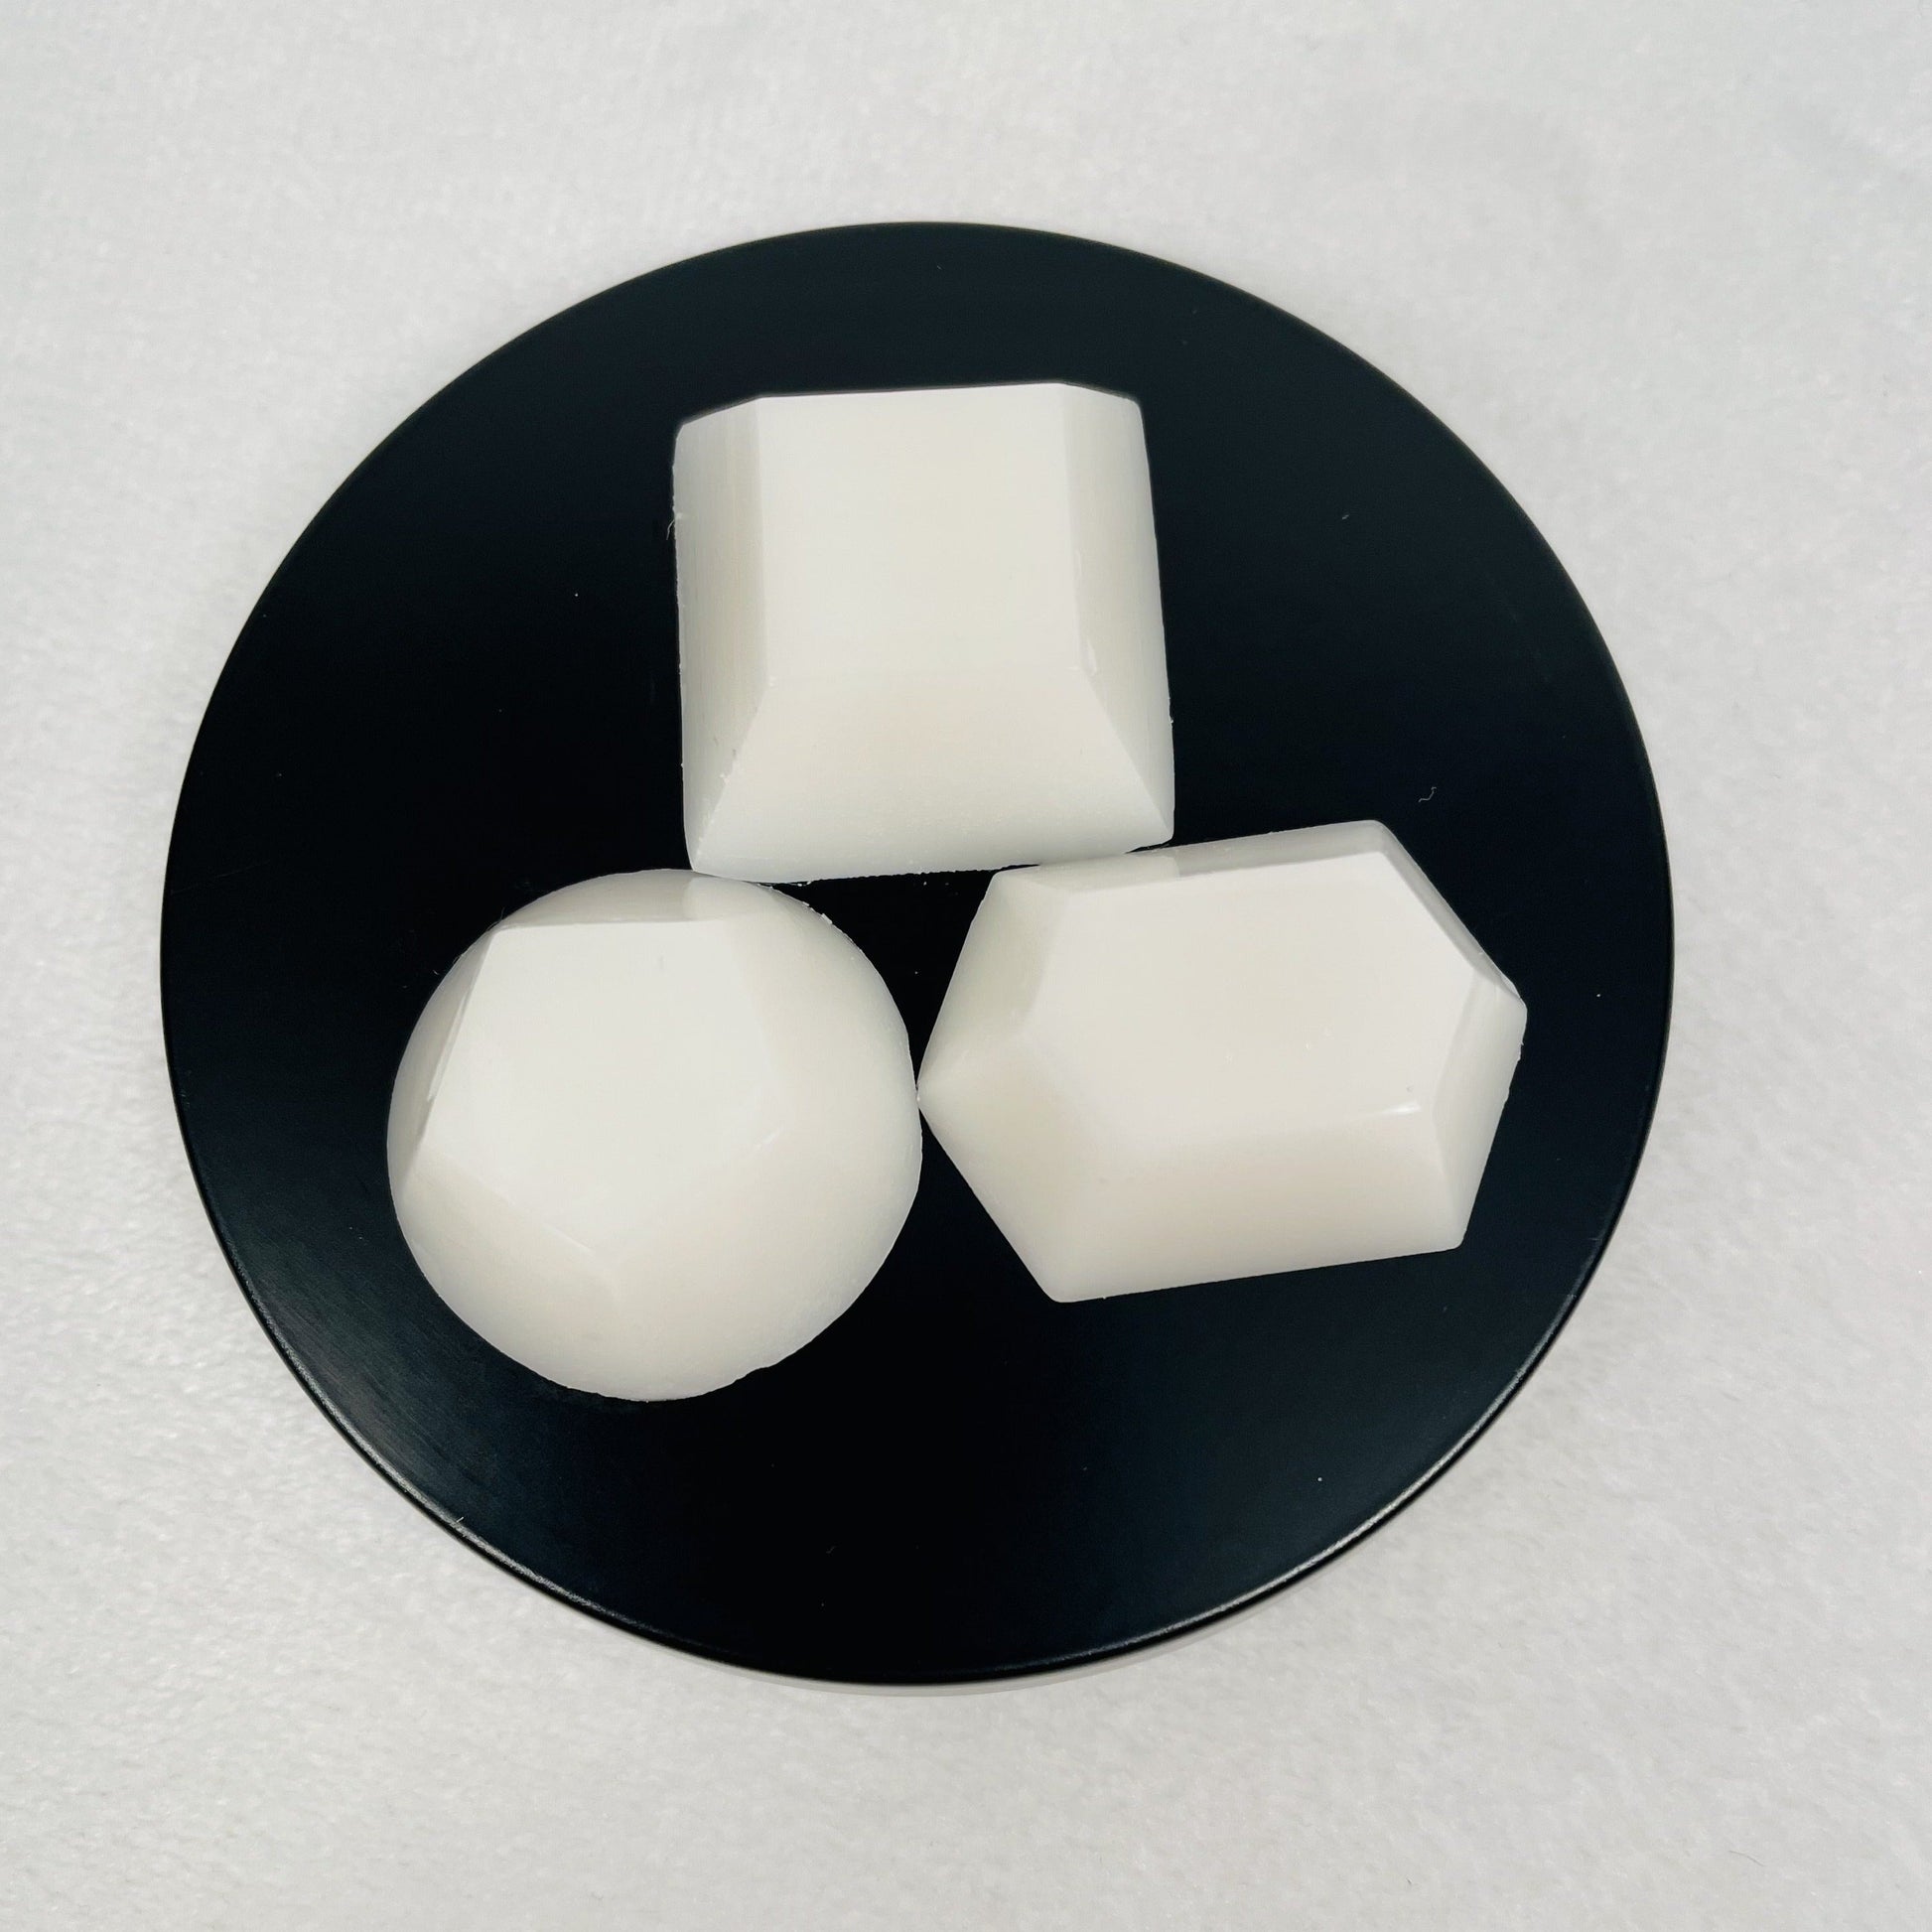 The Natural Wax Melts Collection – WYLDE MOON